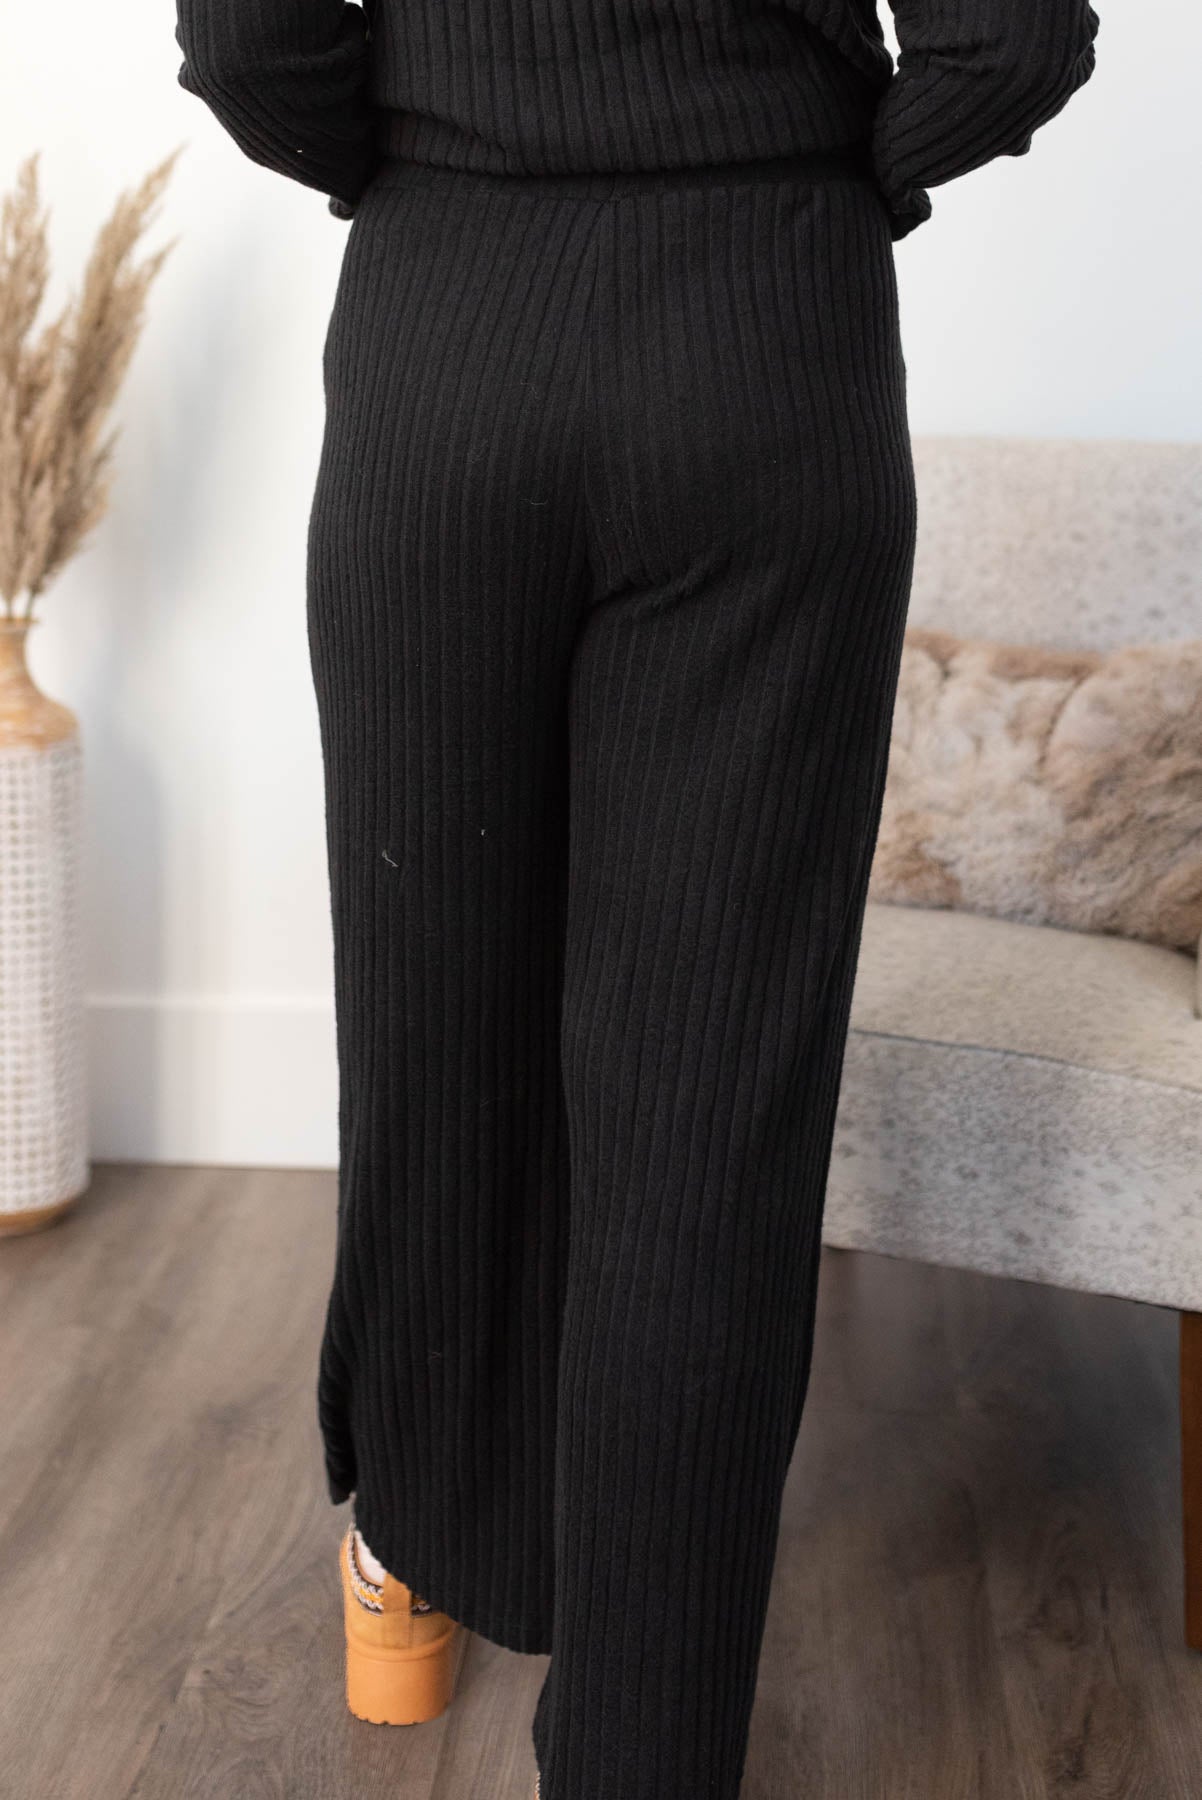 Back view of the pants on the black ribbed lounge set